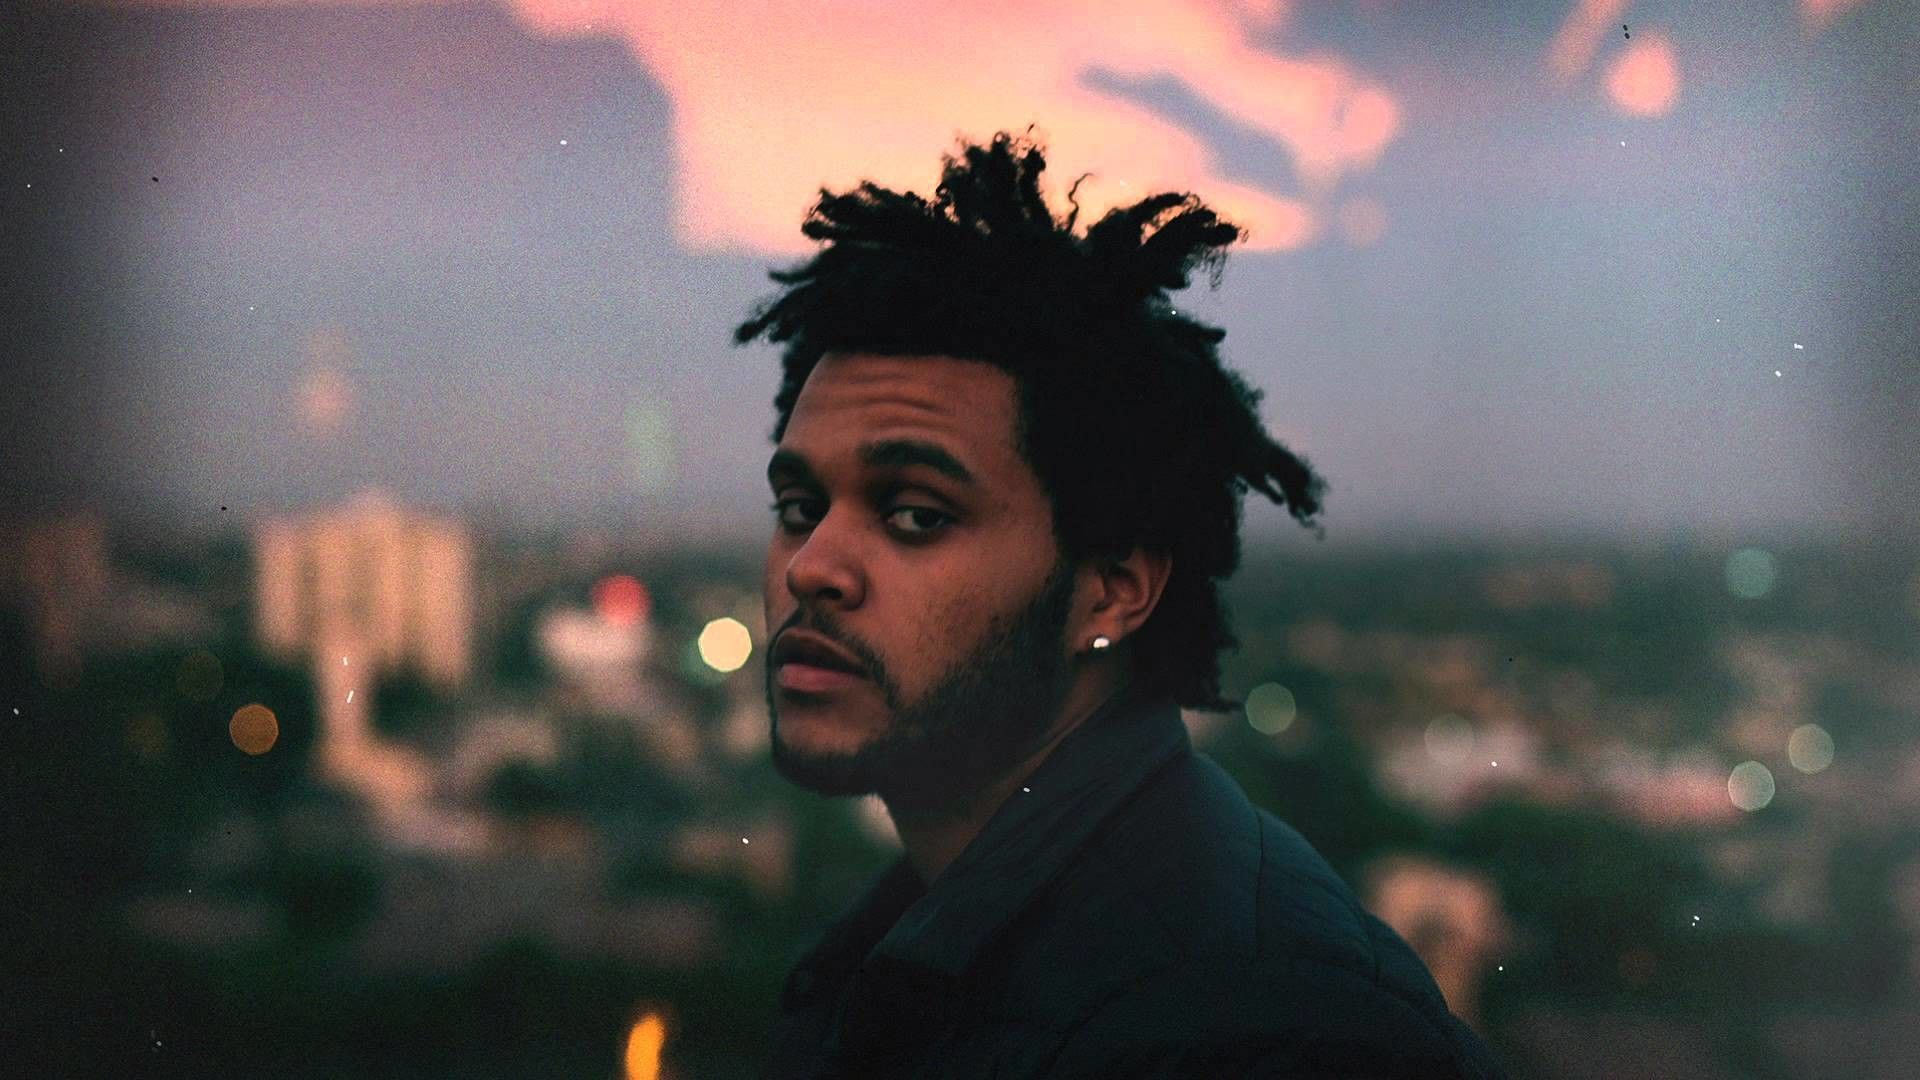 HD wallpaper The Weeknd Abel Tesfaye Top music artist and bands   Wallpaper Flare